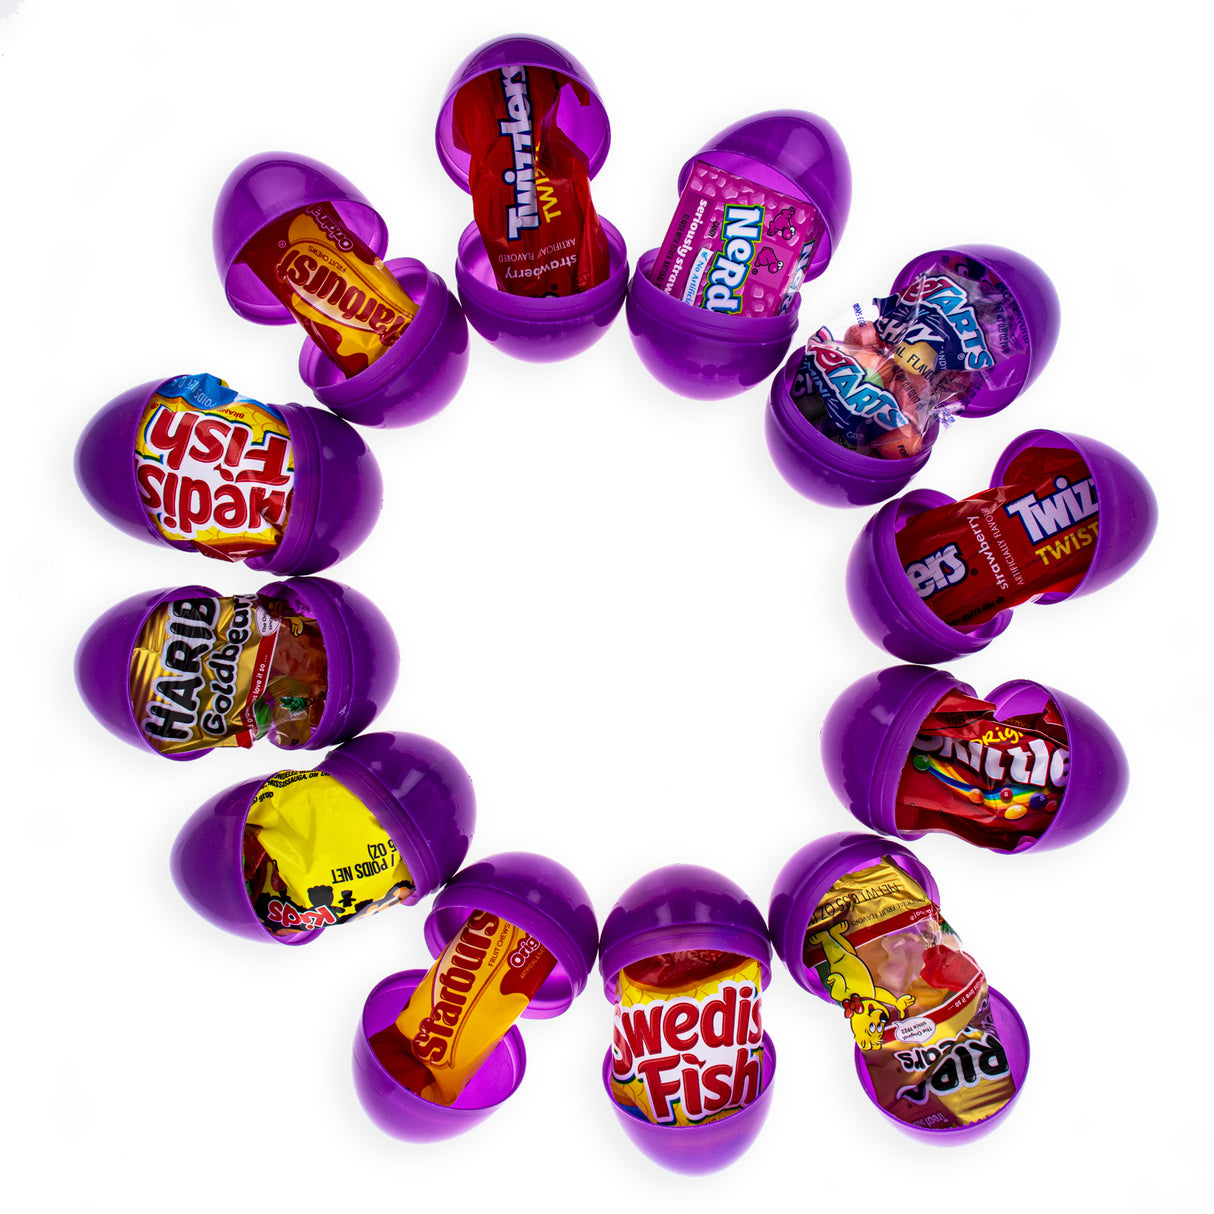 Plastic 12 Purple Plastic Easter Eggs Filled with Premium Candy Delights in Purple color Oval